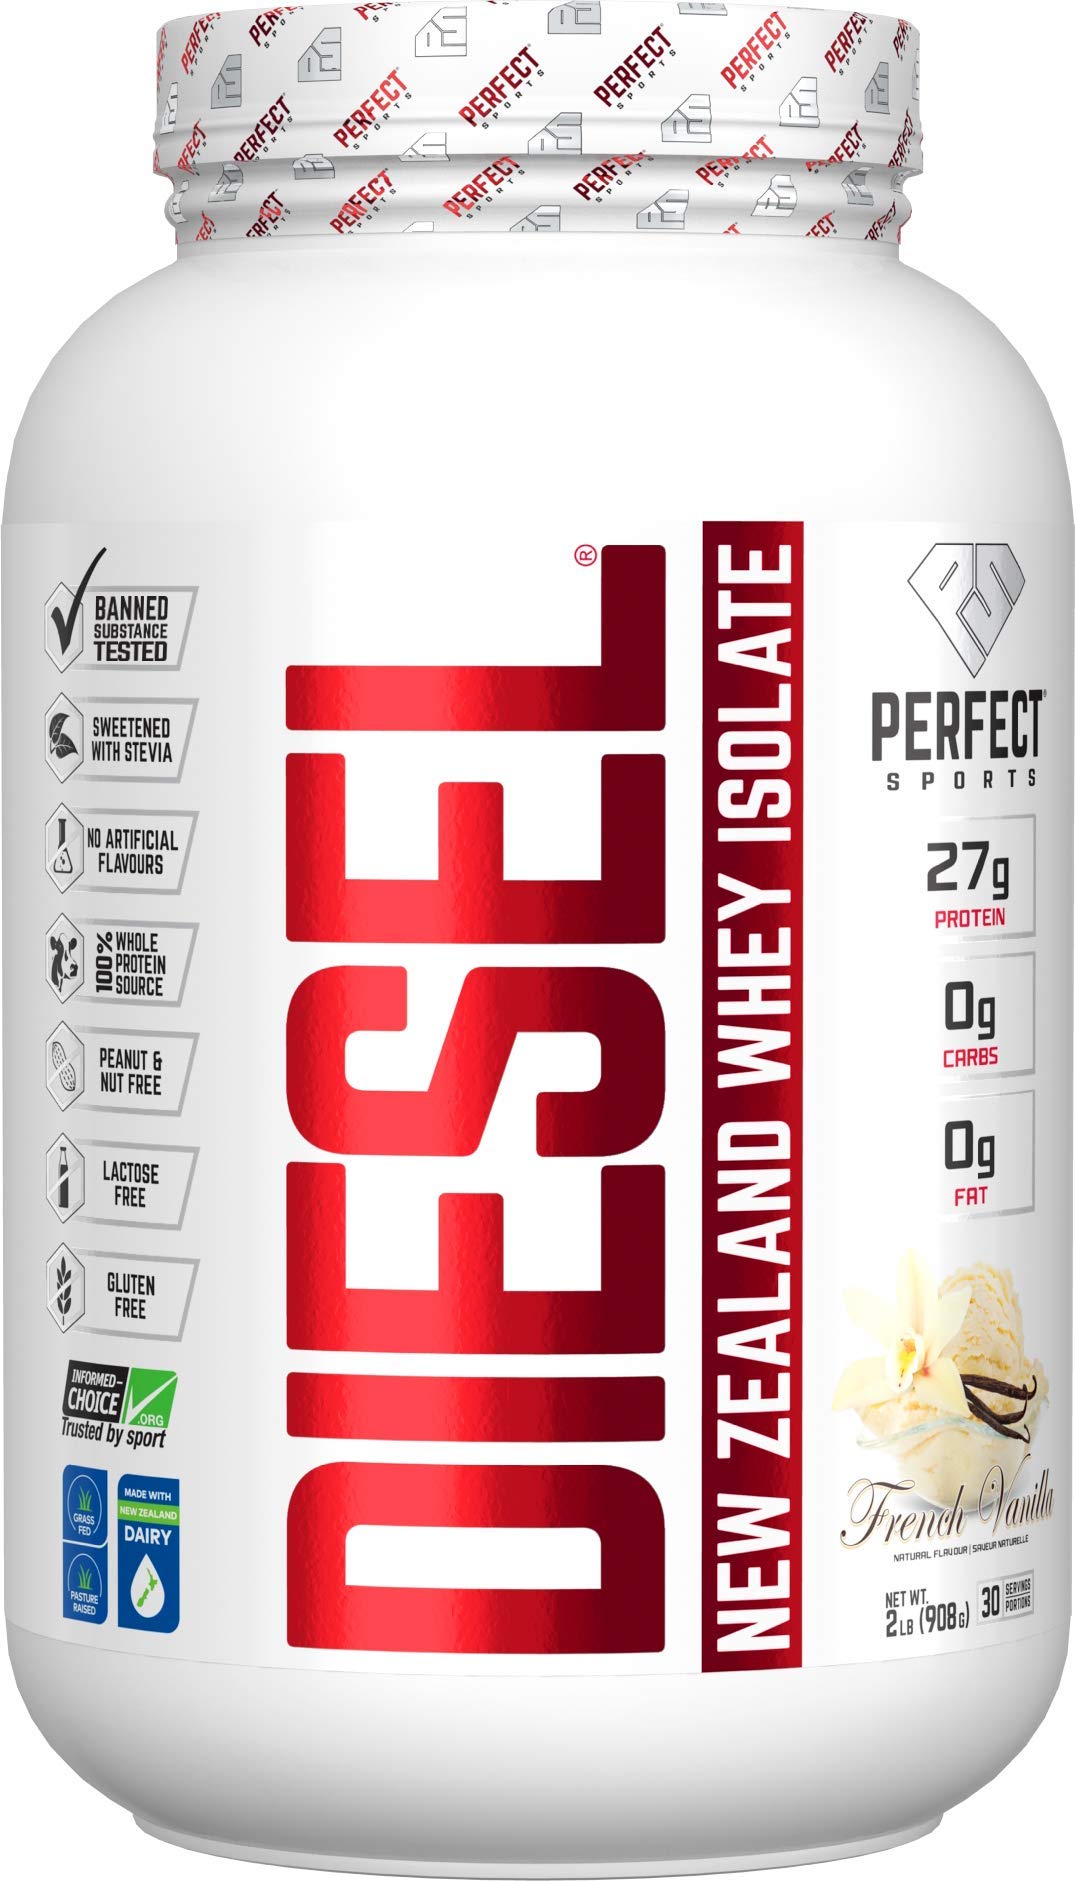 PERFECT SPORTS Diesel New Zealand Whey Isolate, 2 lbs, French Vanilla